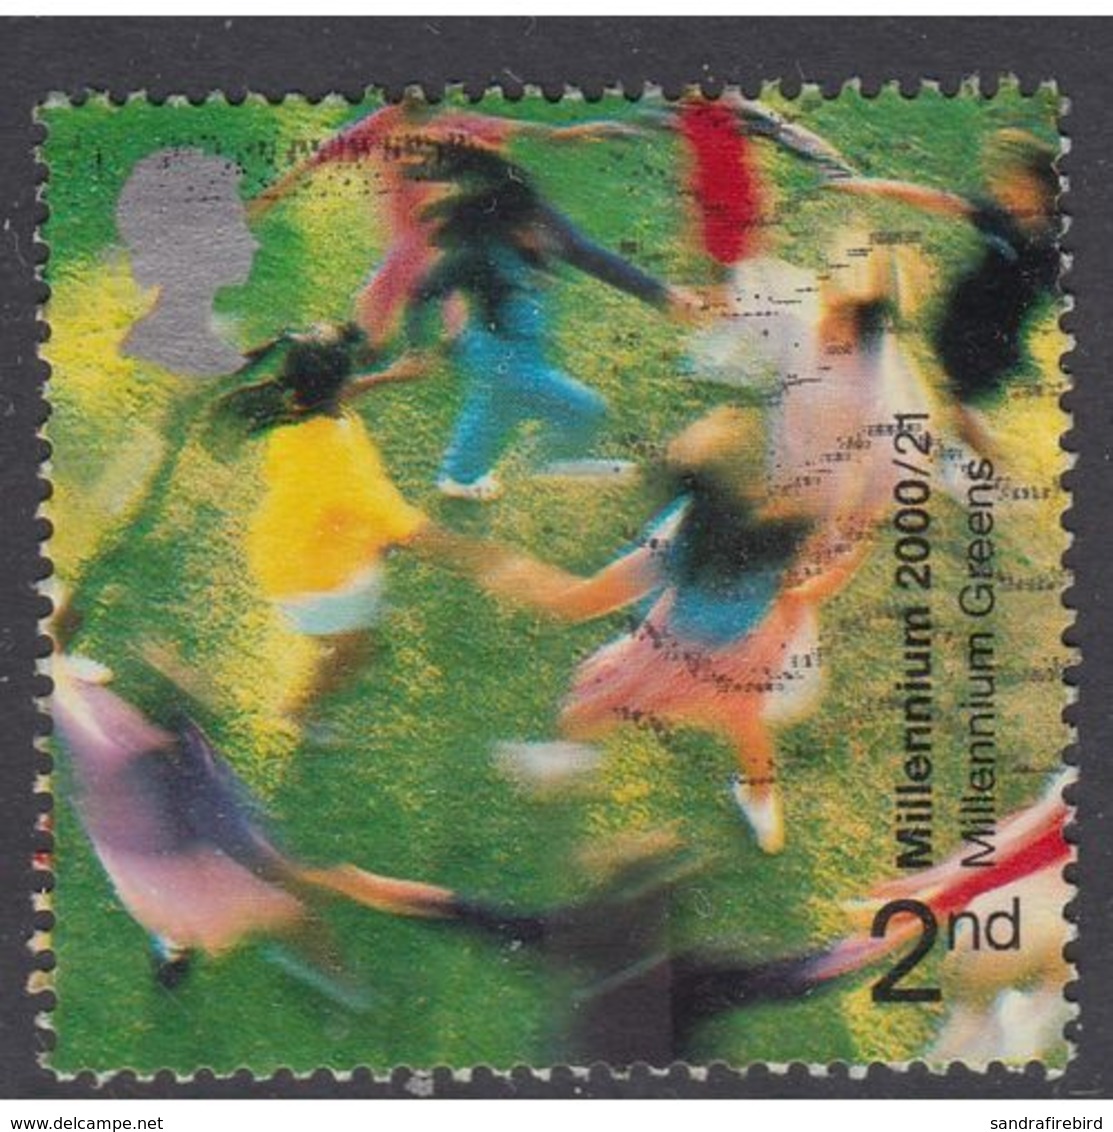 2000 Millennium Projects 6 - "People And Places" - Children Playing 2nd - Used Stamps